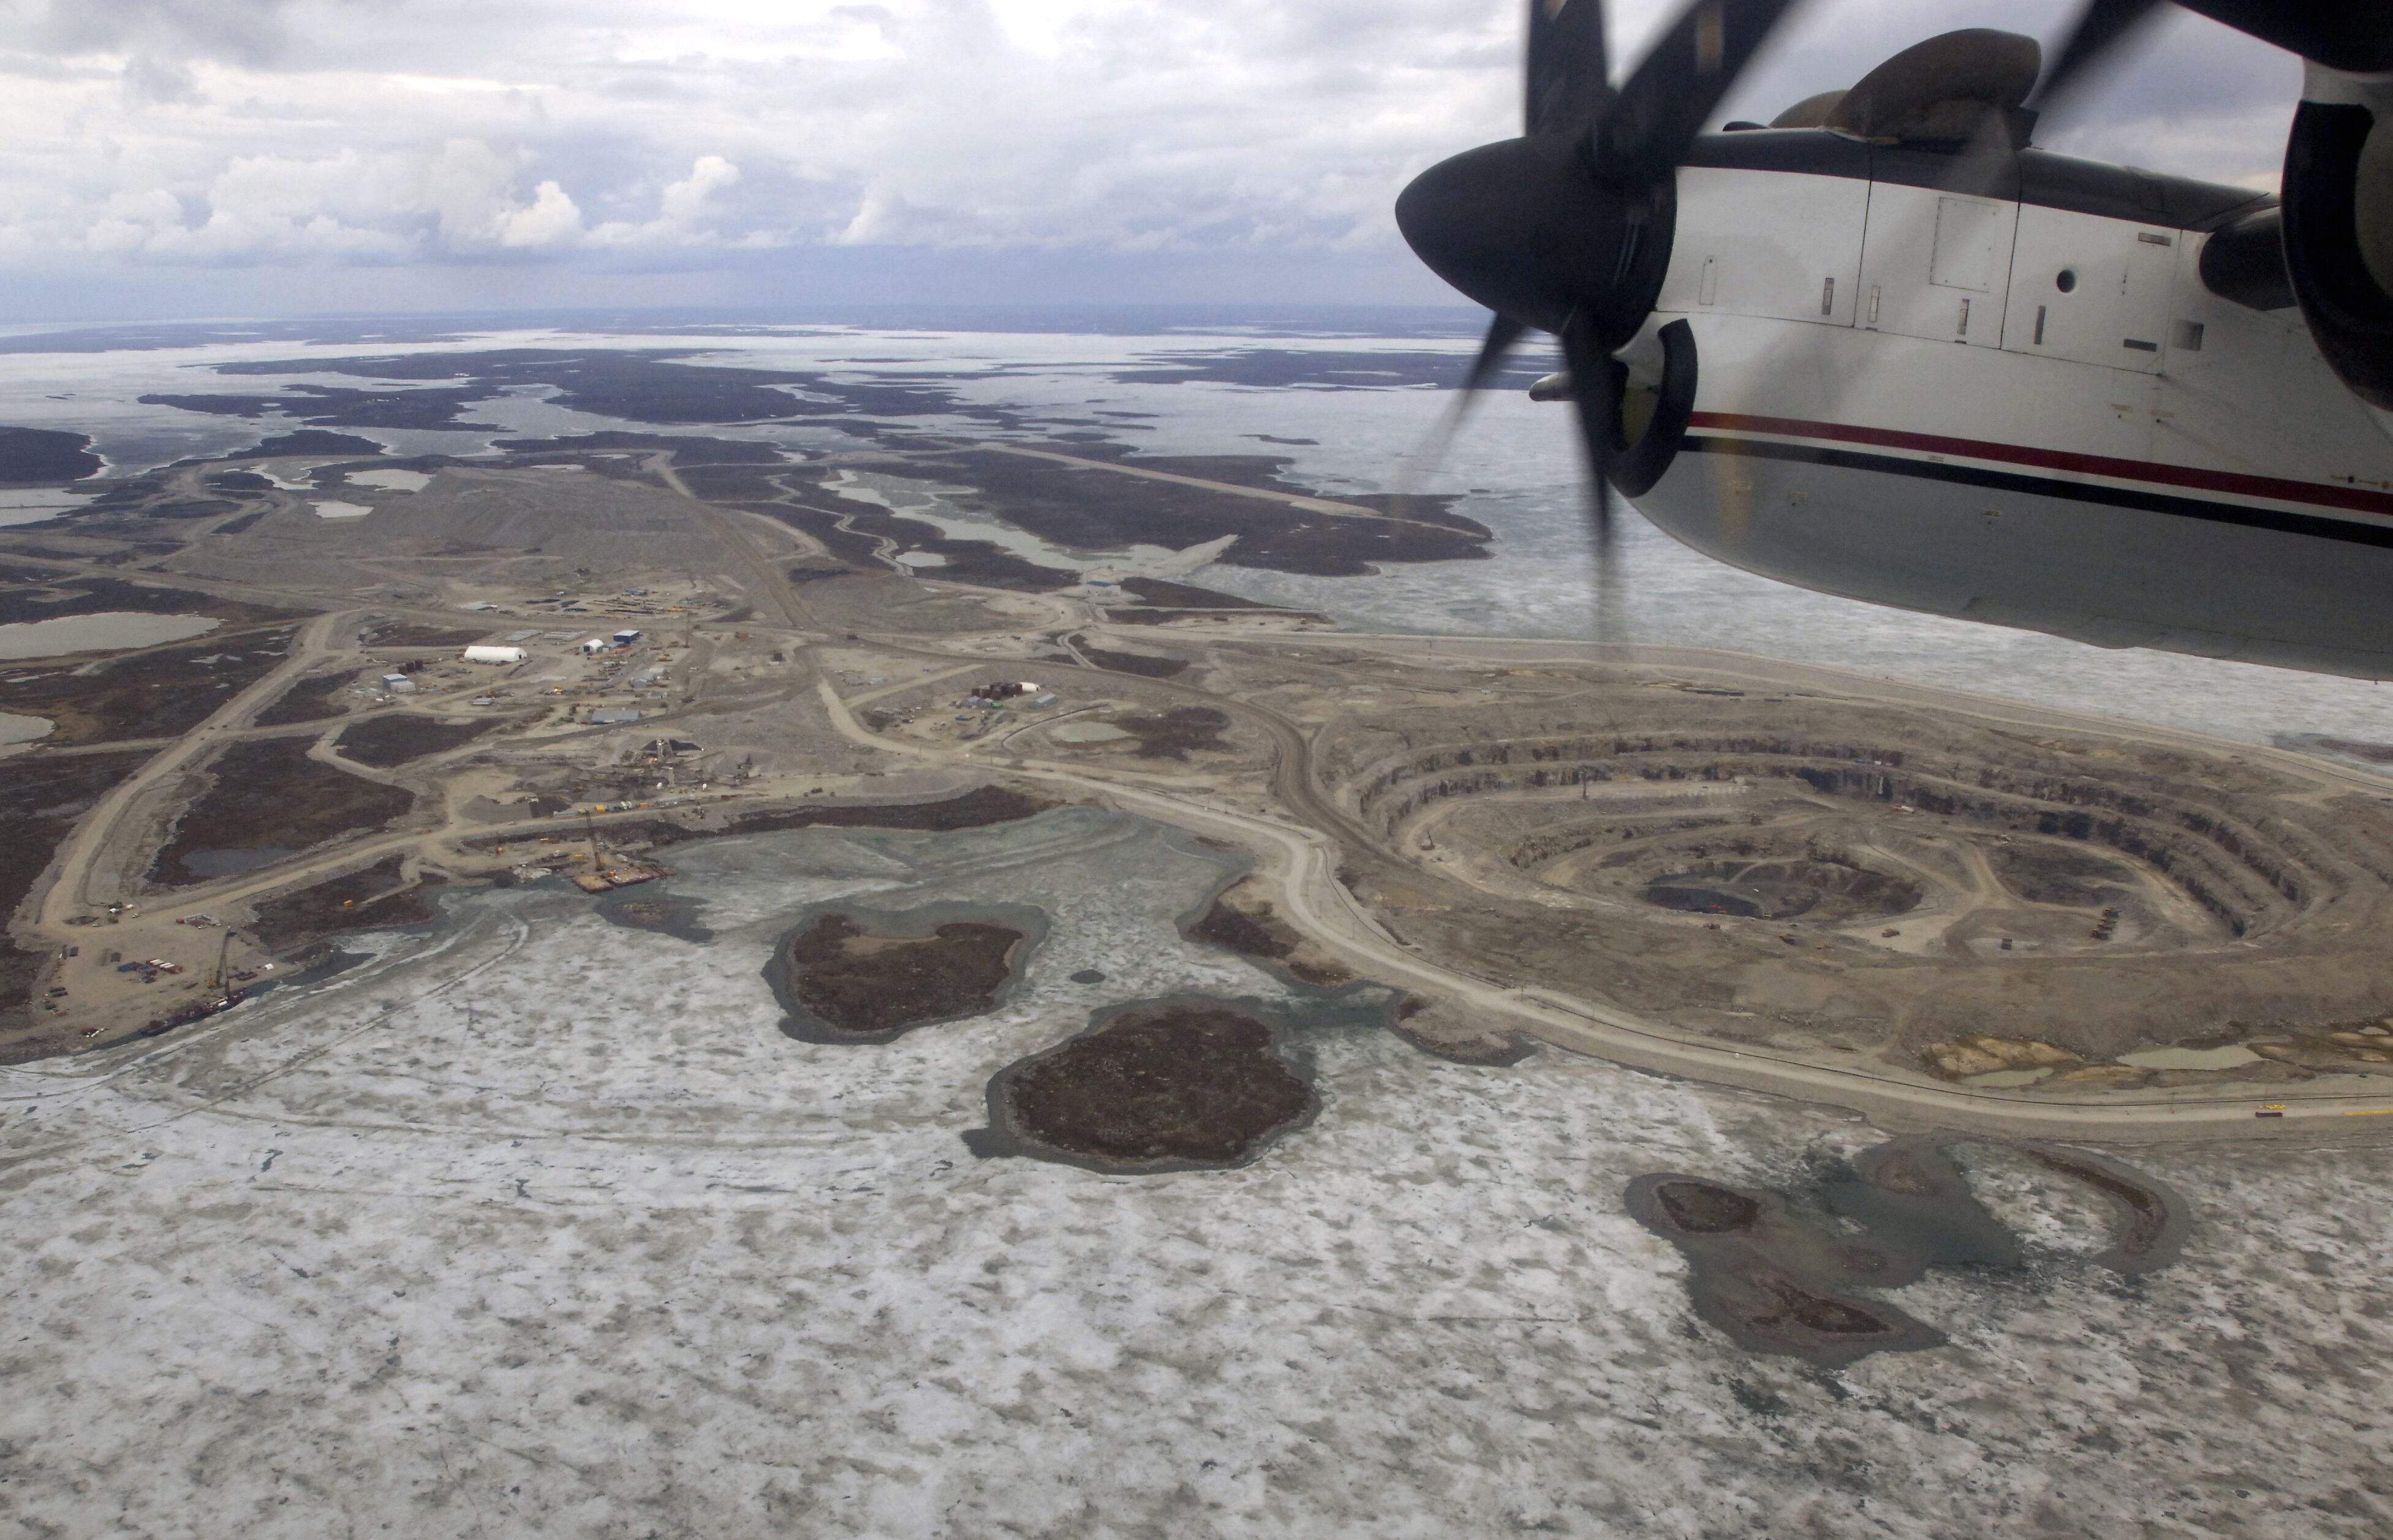 The Diavik diamond mine, seen from an aircraft, in June 2005.